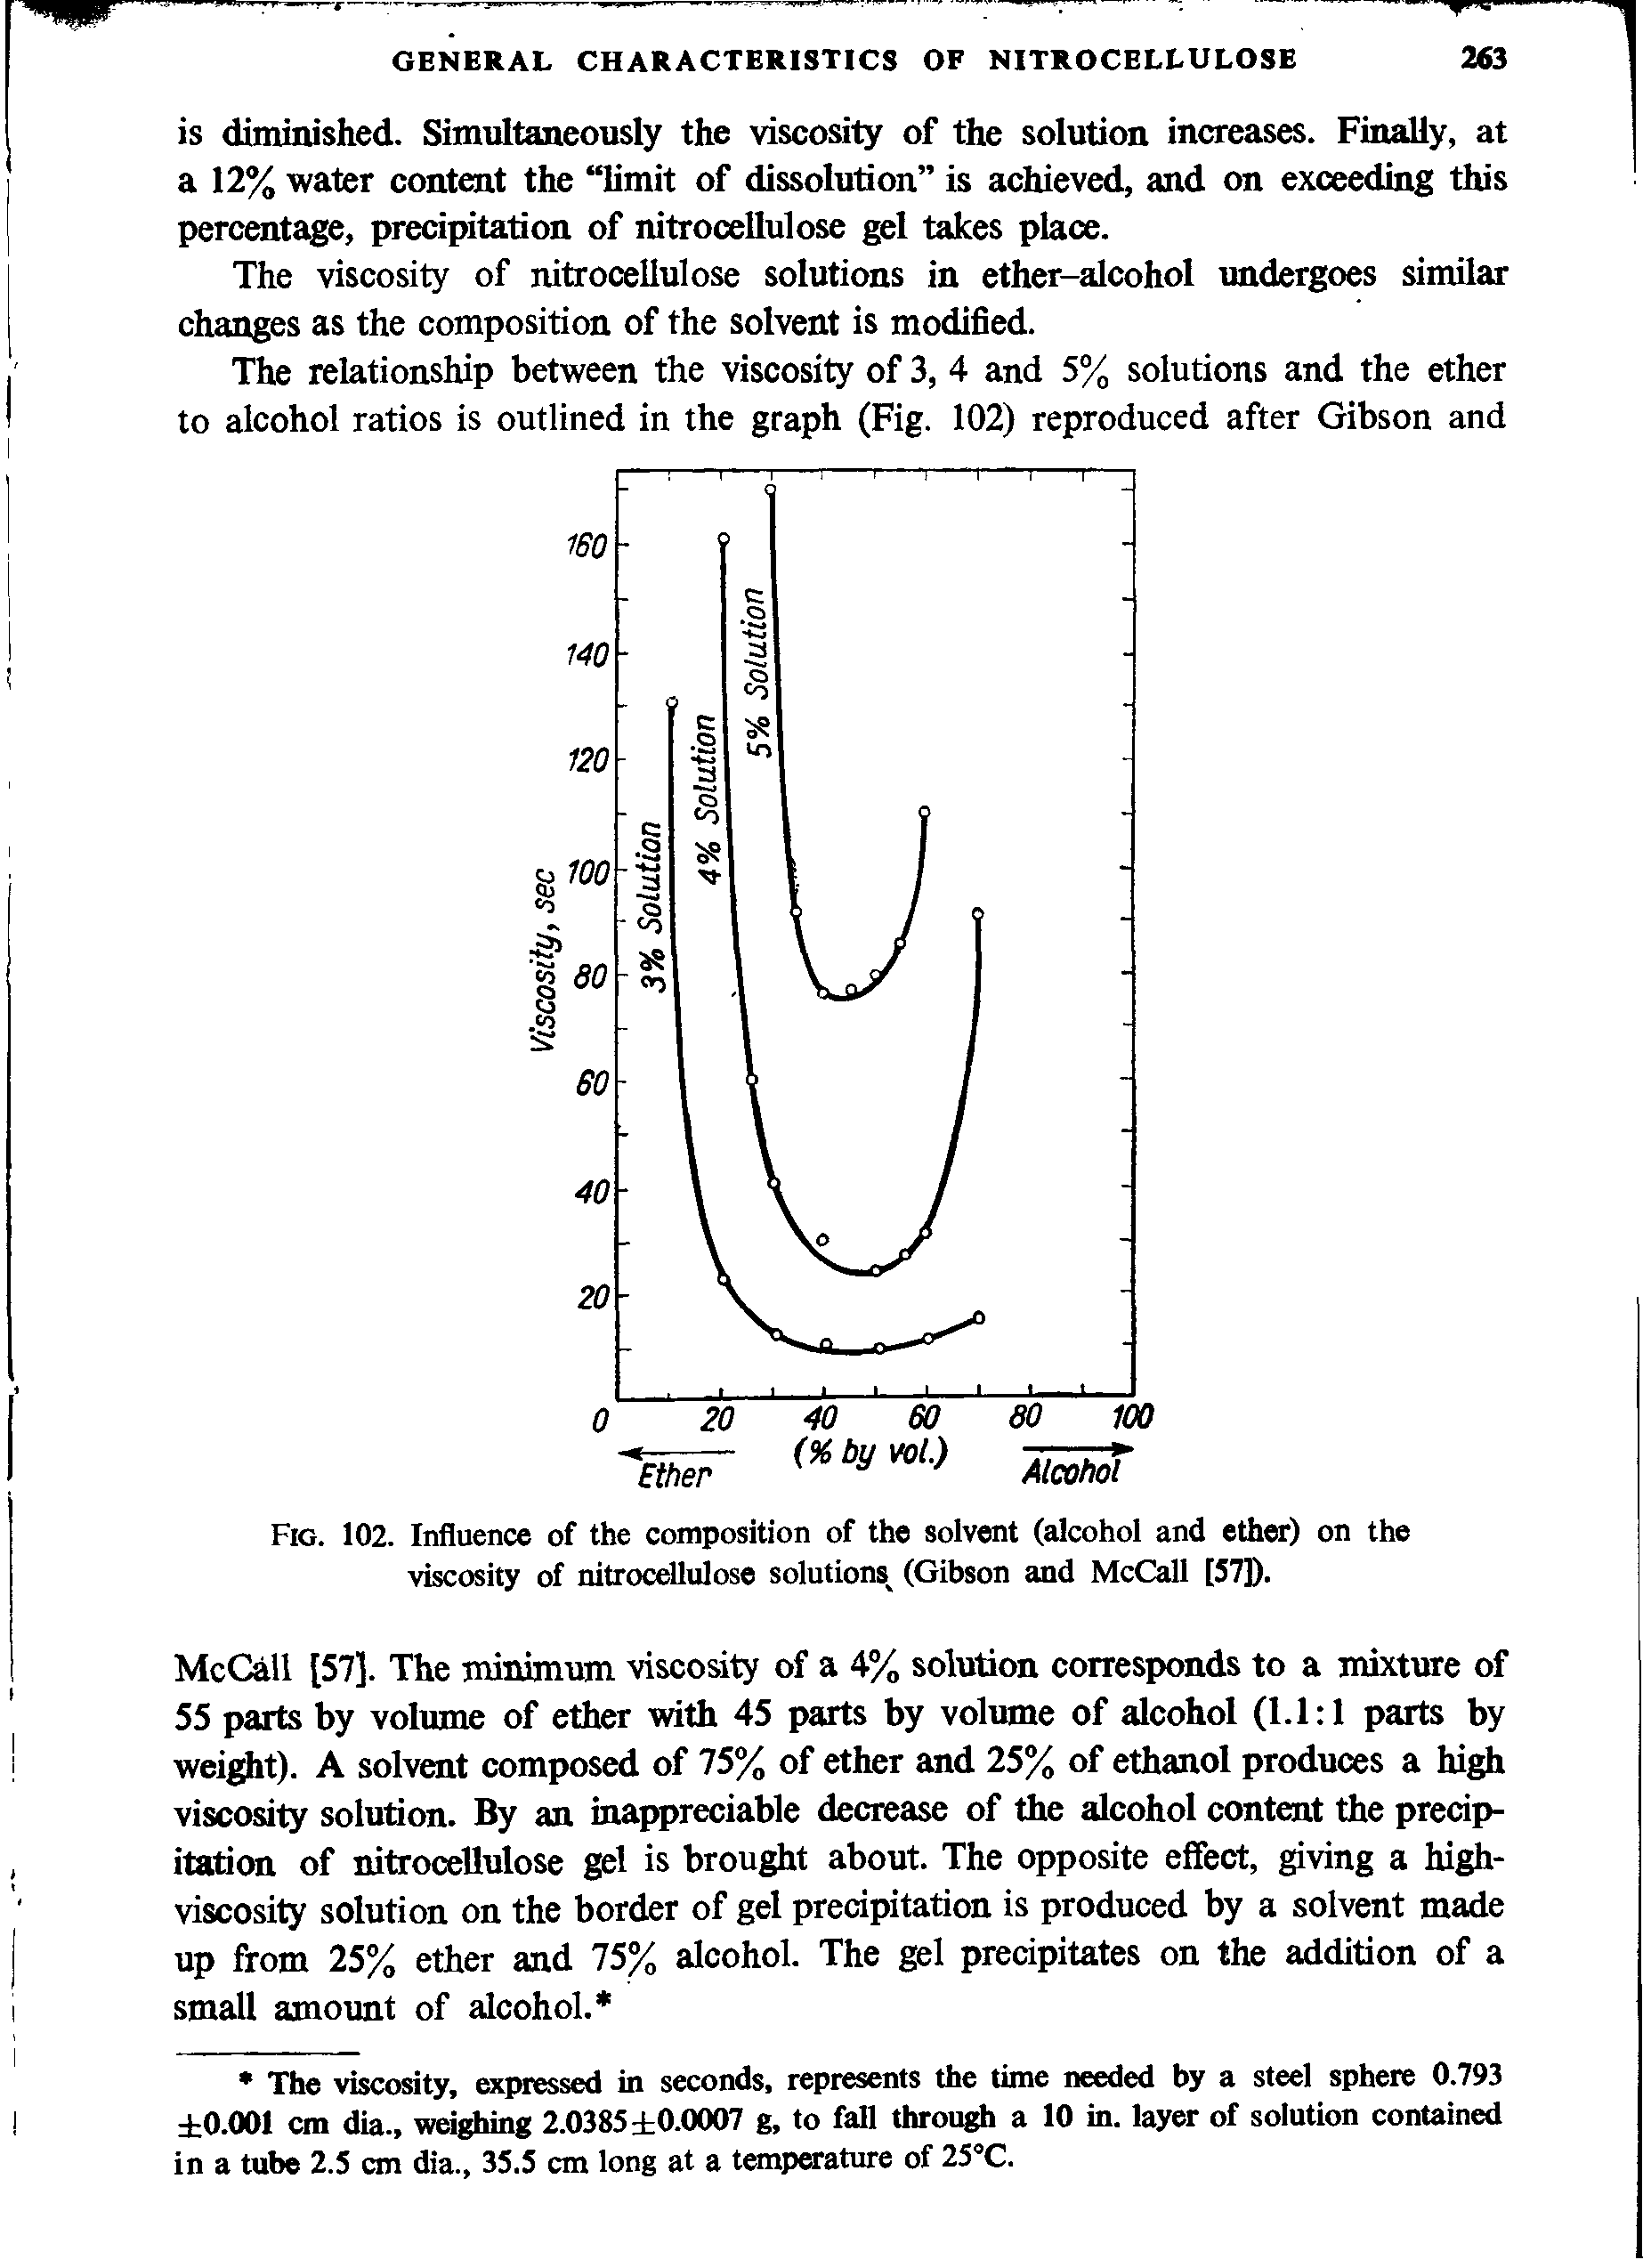 Fig. 102. Influence of the composition of the solvent (alcohol and ether) on the viscosity of nitrocellulose solutions (Gibson and McCall [57]).